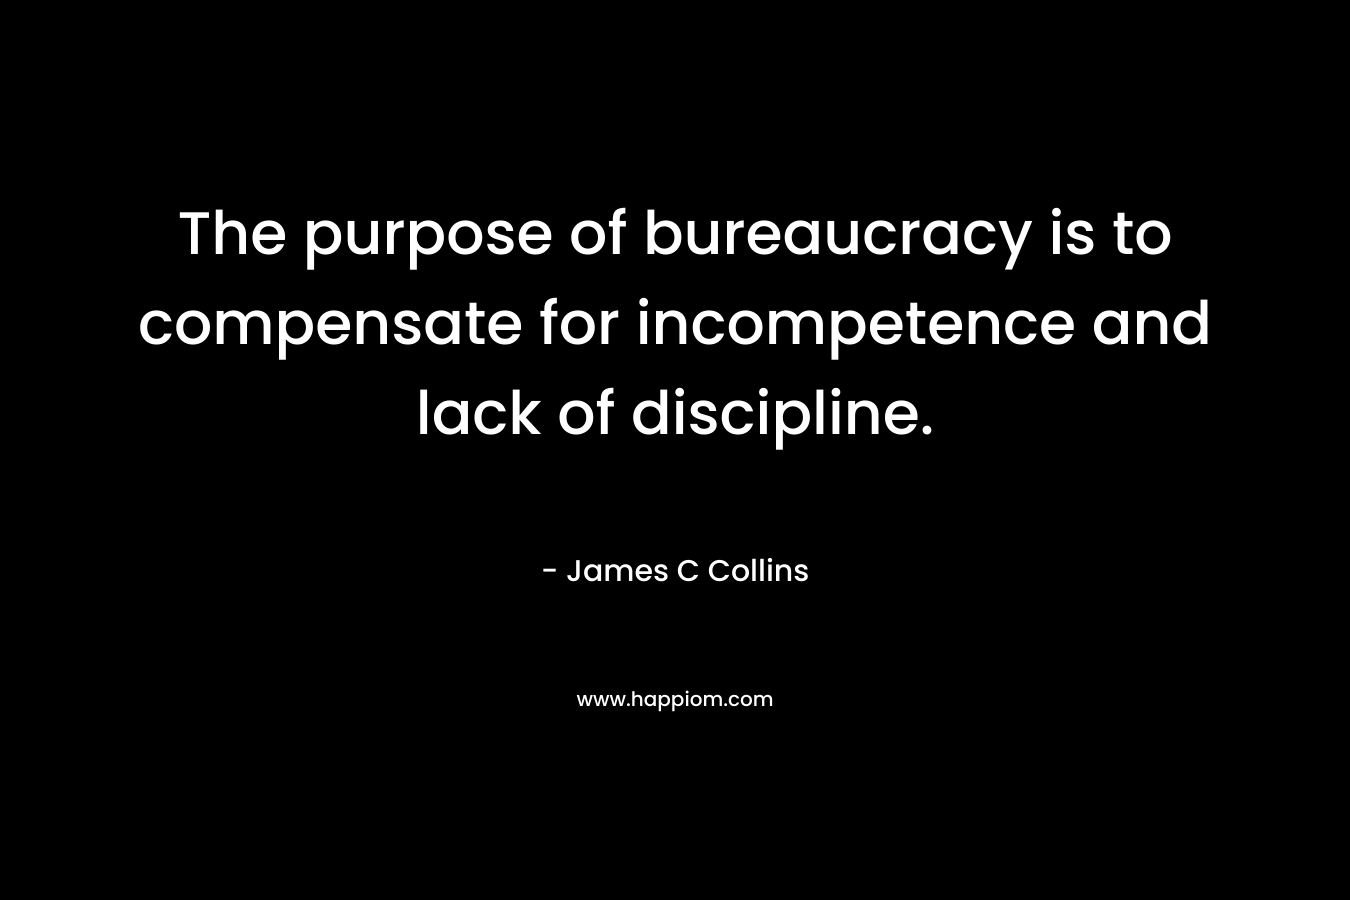 The purpose of bureaucracy is to compensate for incompetence and lack of discipline. – James C Collins